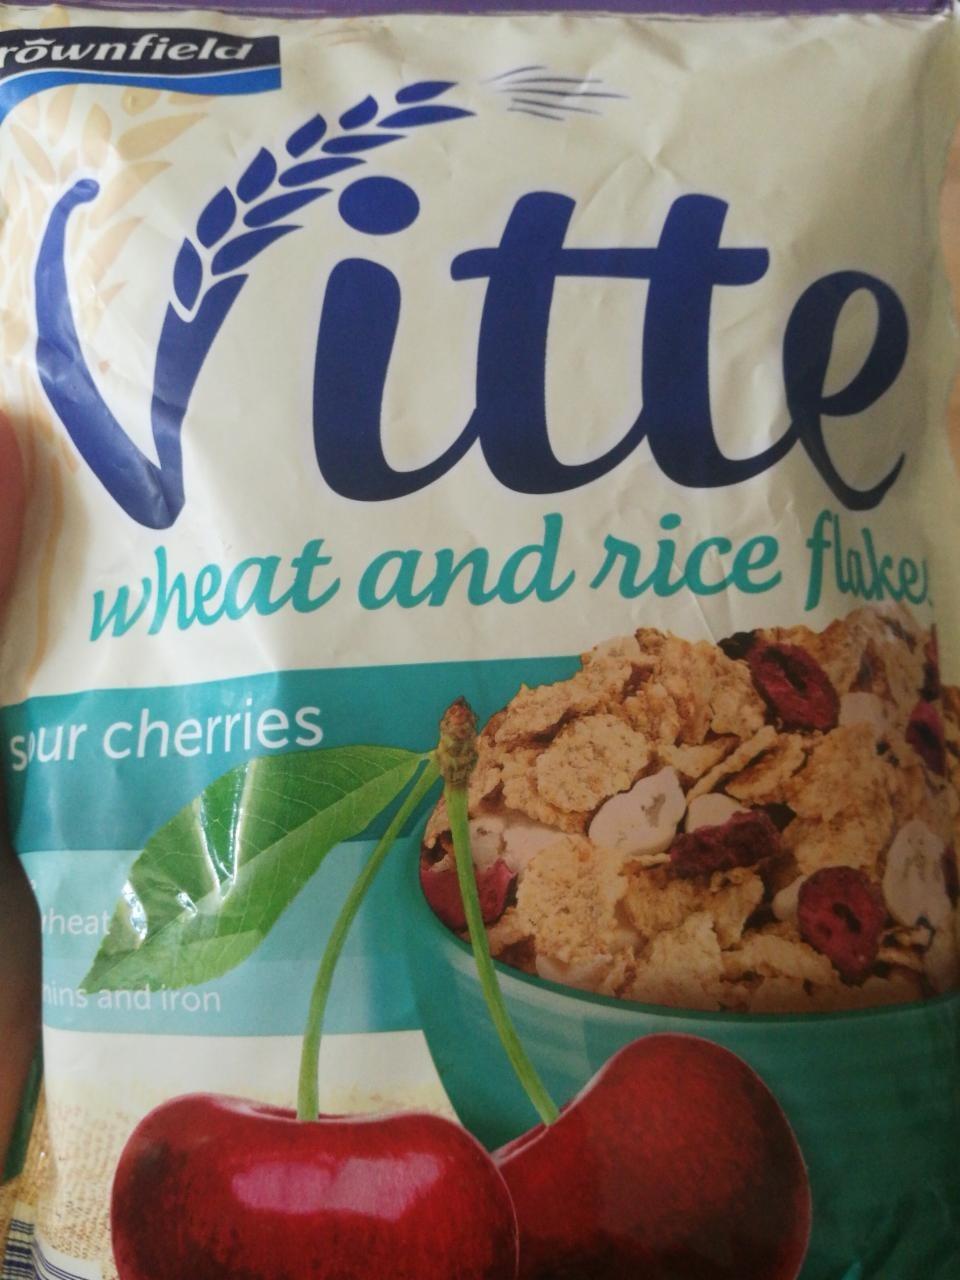 Képek - Vitte wheat and rice flakes meggyes Crownfield